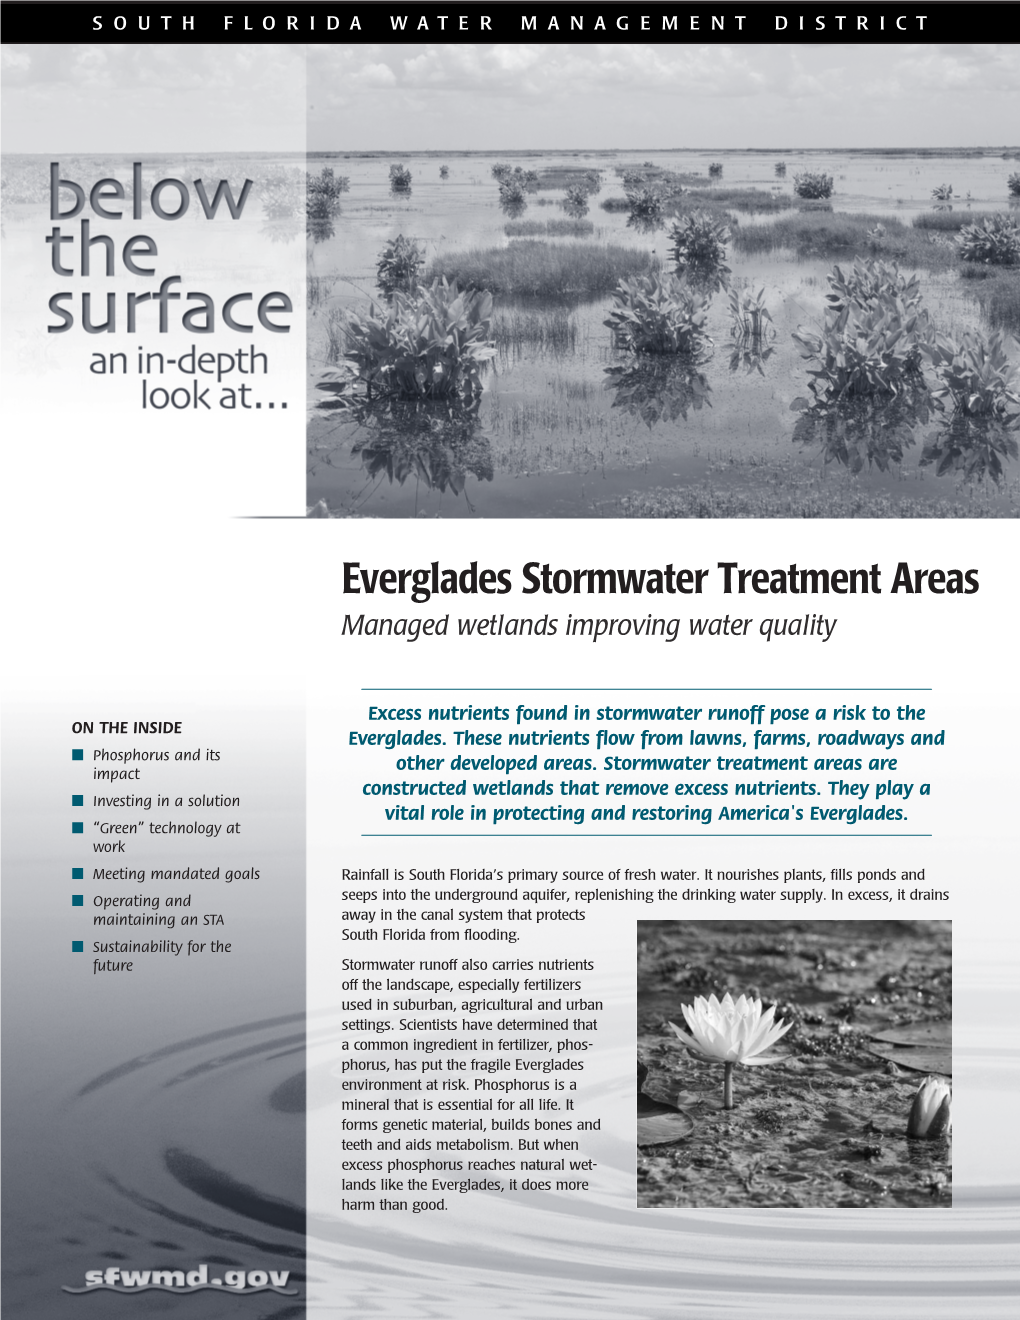 Below the Surface: Everglades Stormwater Treatment Areas